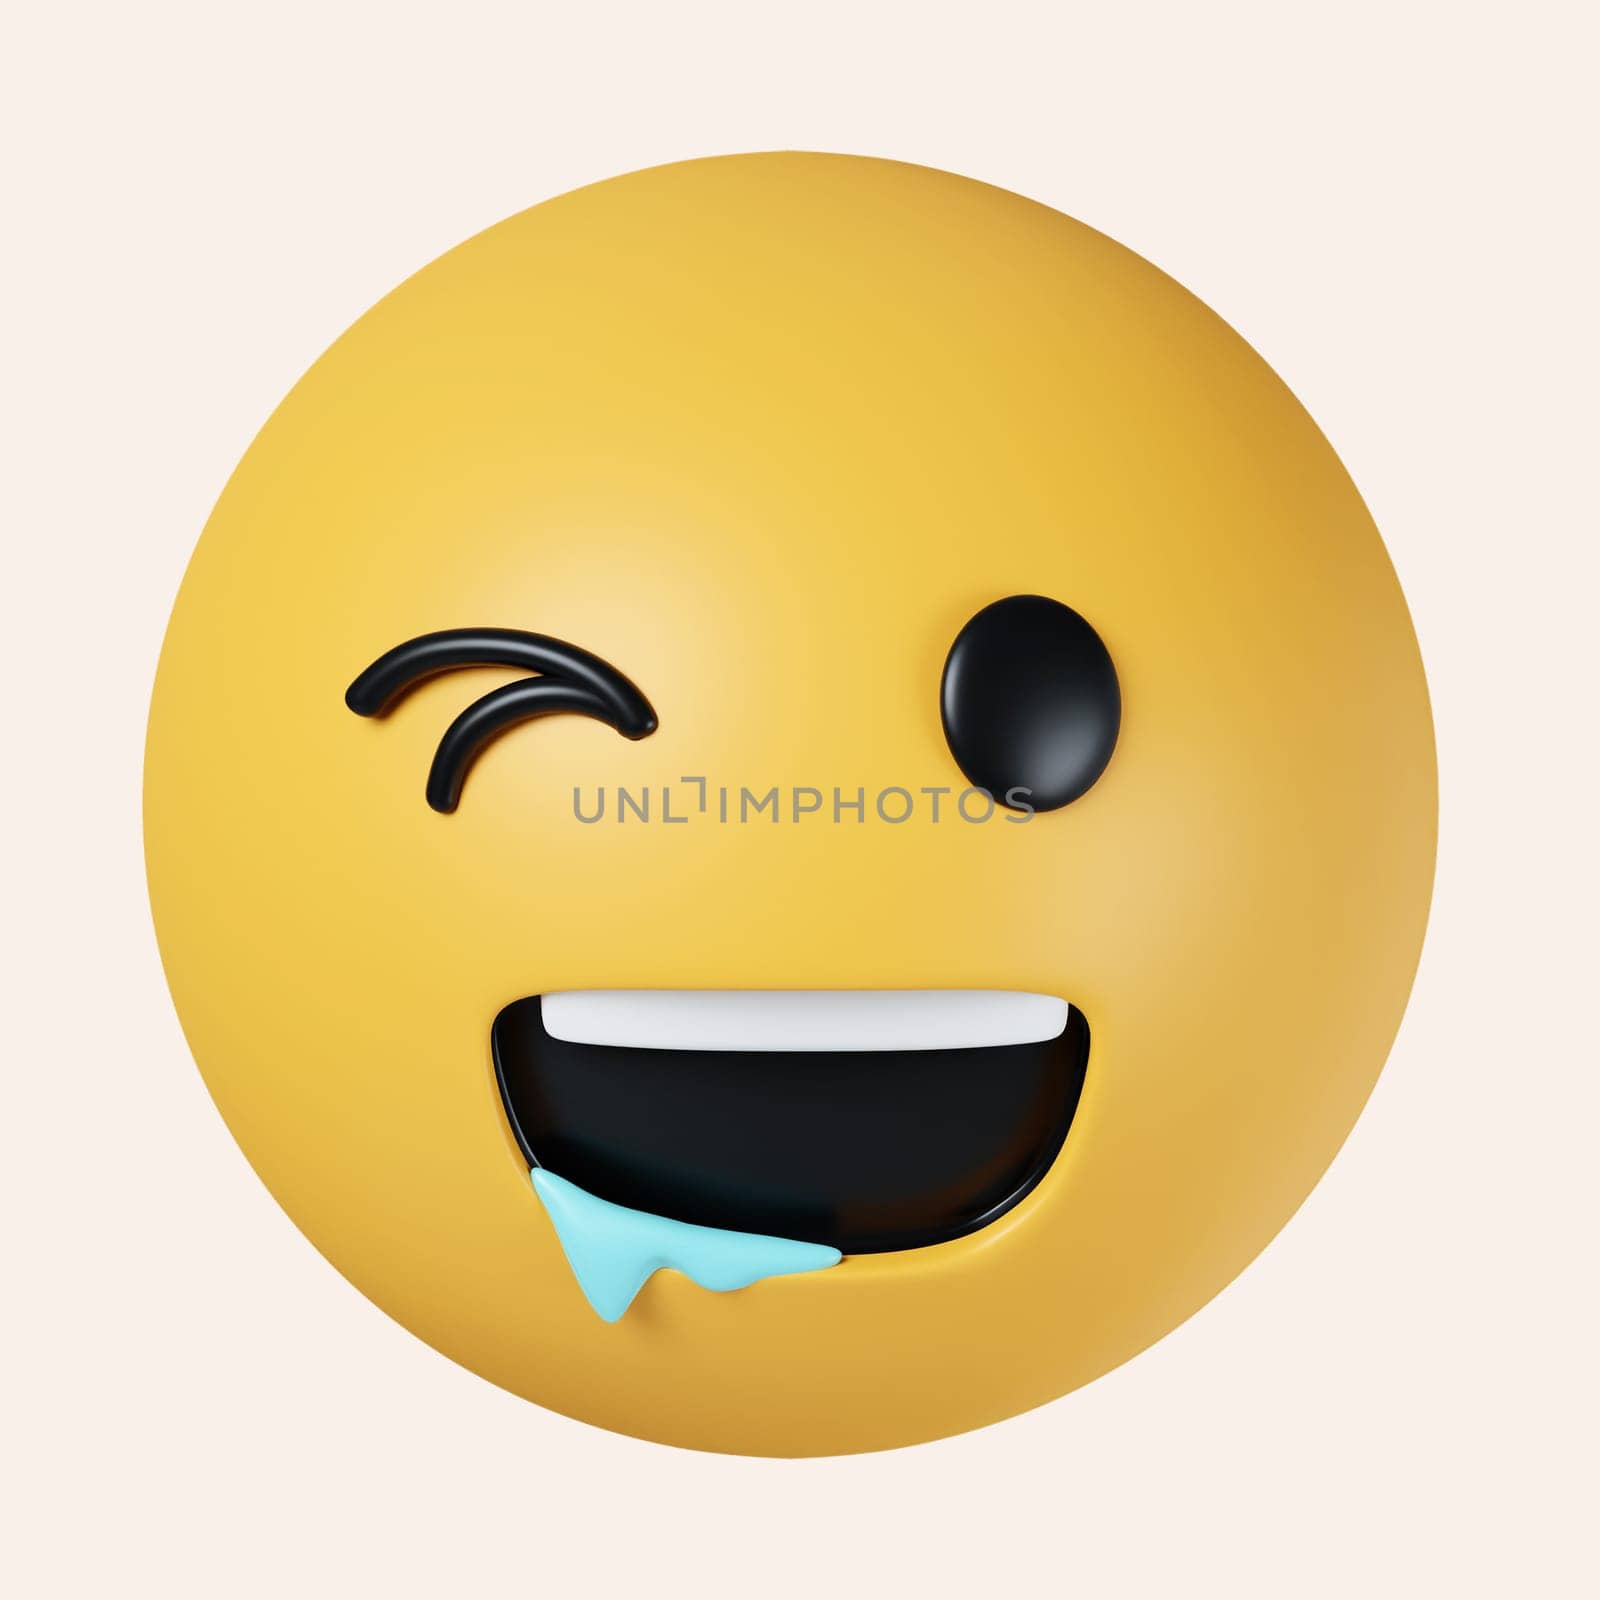 3d Hungry Drooling Face Emoji. Emoticon with saliva from mouth corner. icon isolated on gray background. 3d rendering illustration. Clipping path..